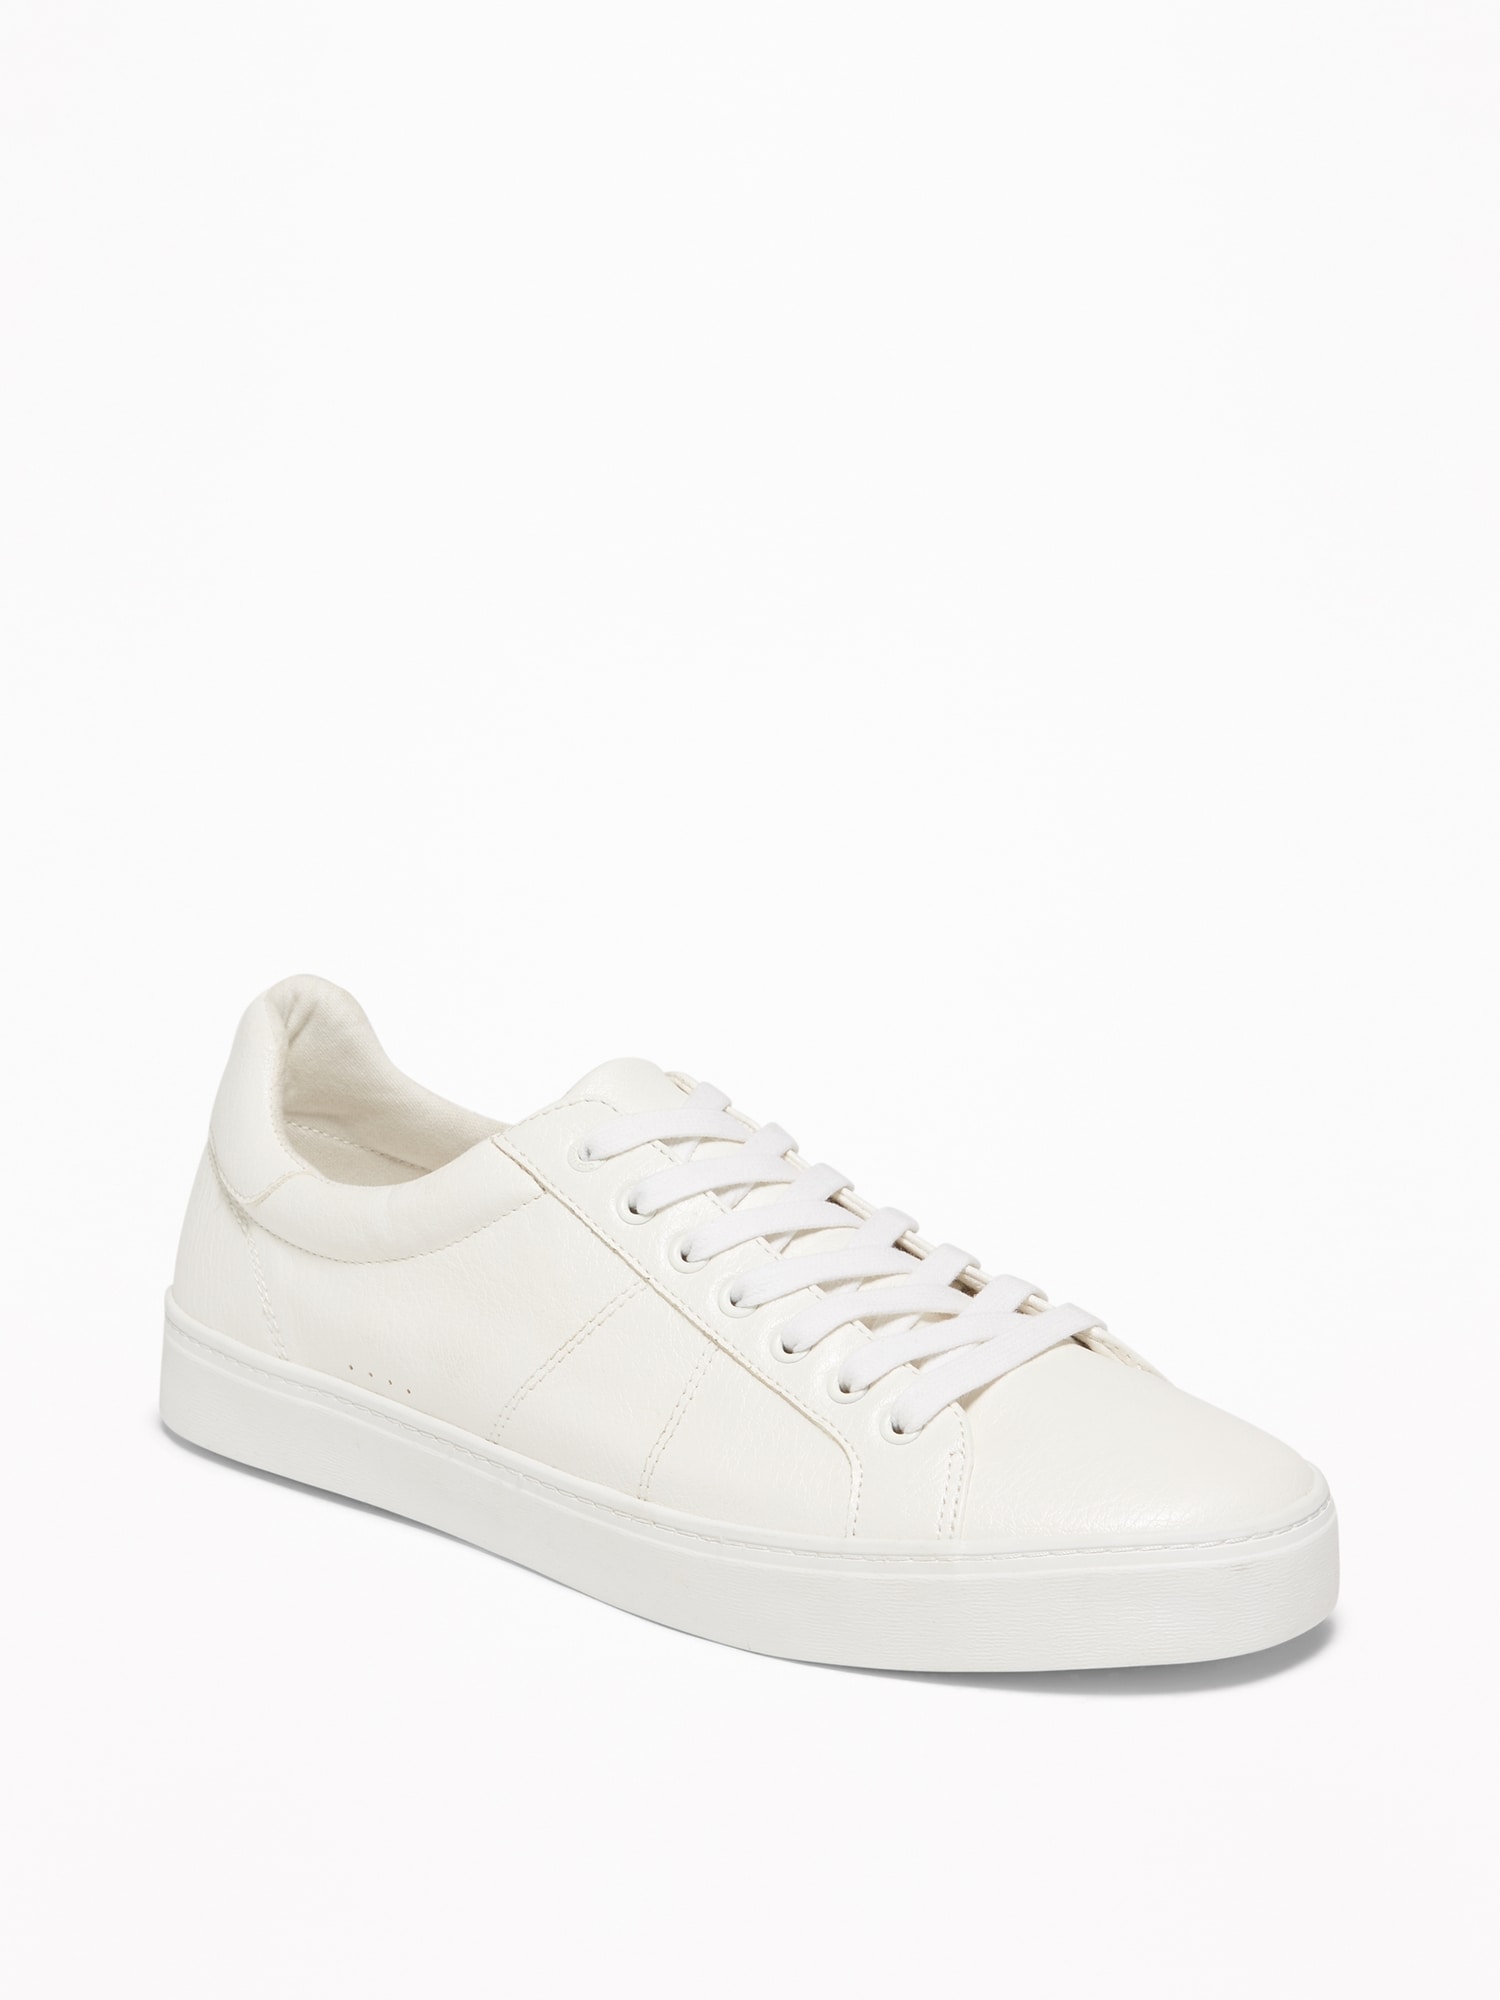 mens white leather sneakers